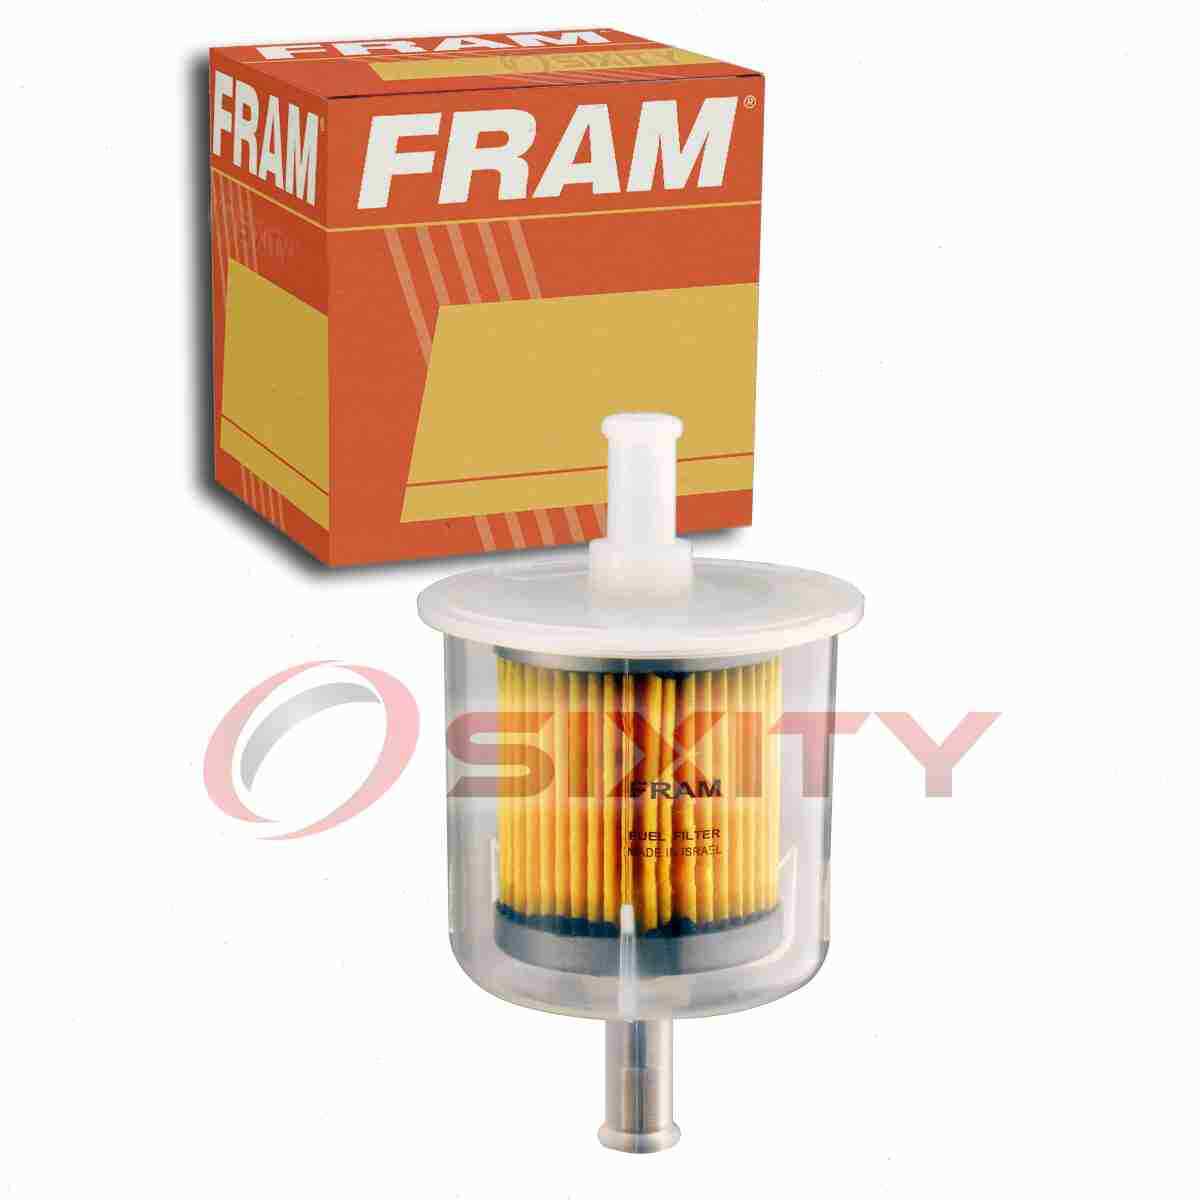 FRAM Fuel Filter for 1984-1993 Lada Niva Gas Pump Line Air Delivery Filters  oc